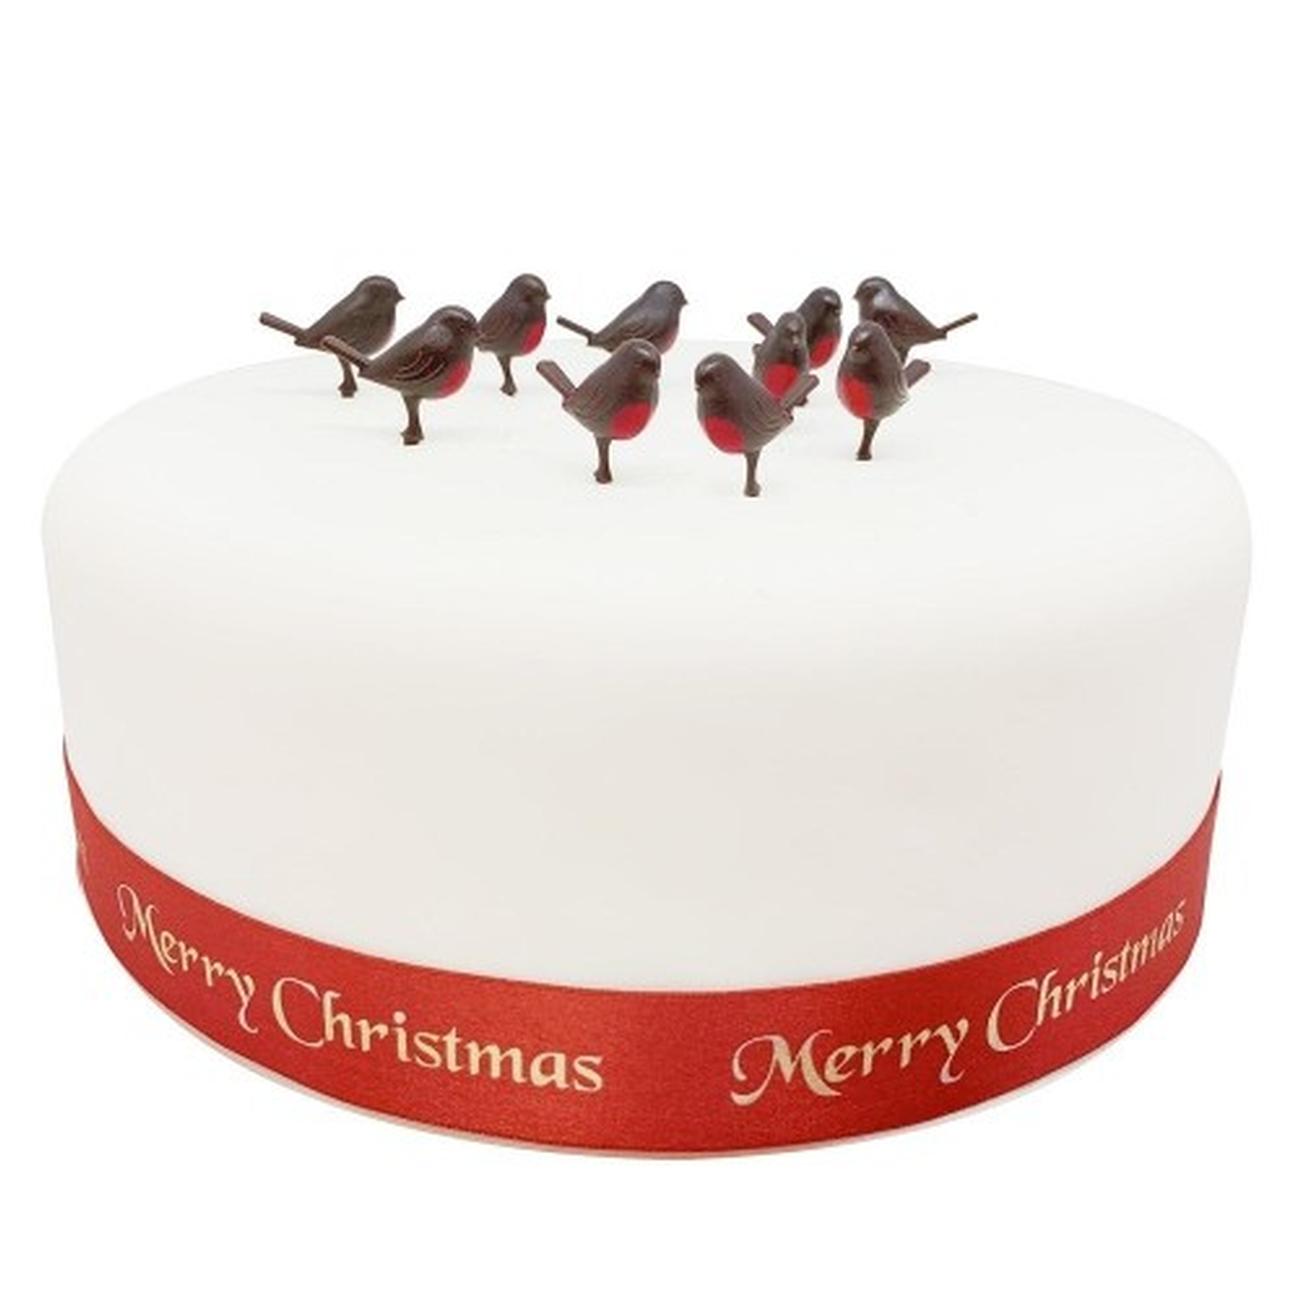 Christmas Cake/Yule Log Toppers Holly Leaf - Christmastree - Robin - x 4  Each Decorations : Amazon.co.uk: Home & Kitchen